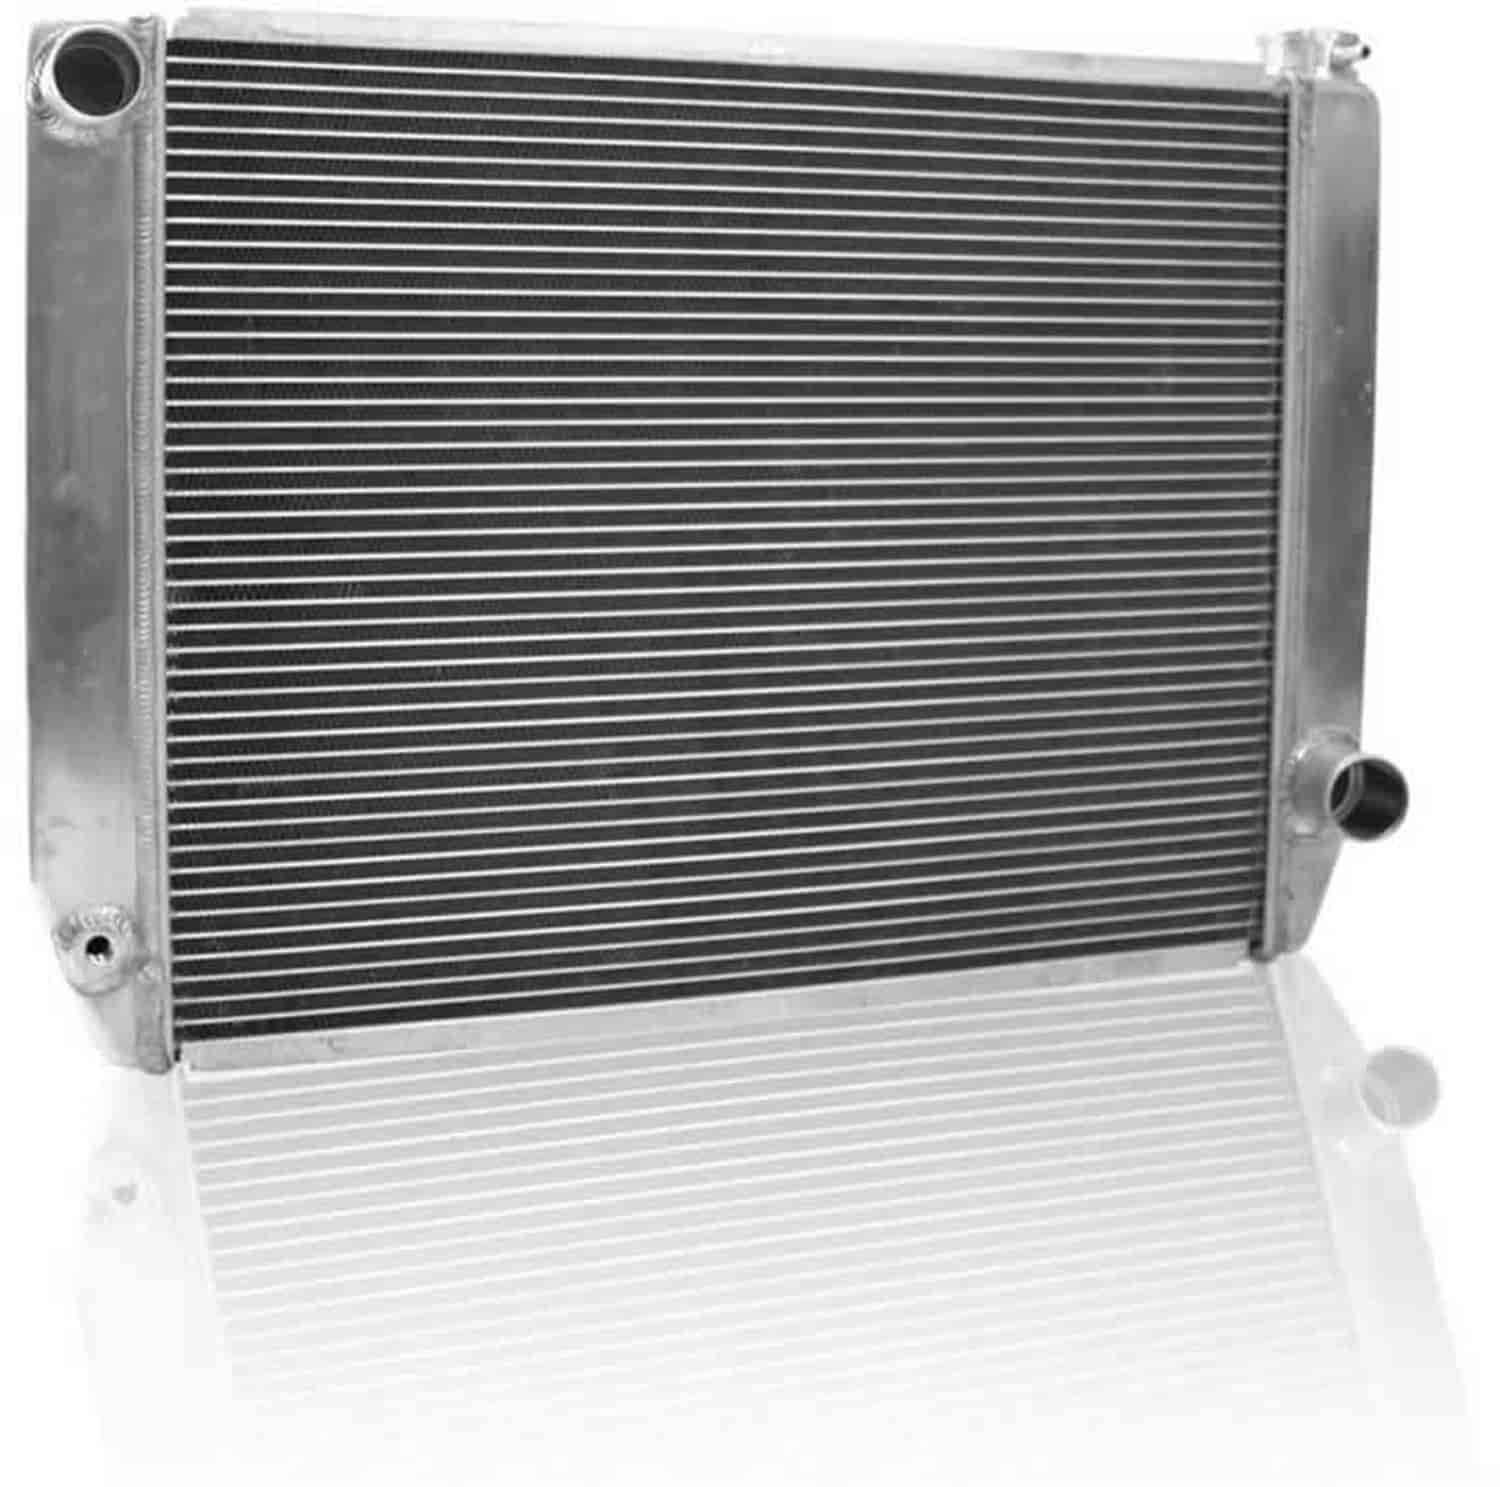 MegaCool Universal Fit Radiator Single Pass Crossflow Design 27.50" x 19" with Straight Outlet